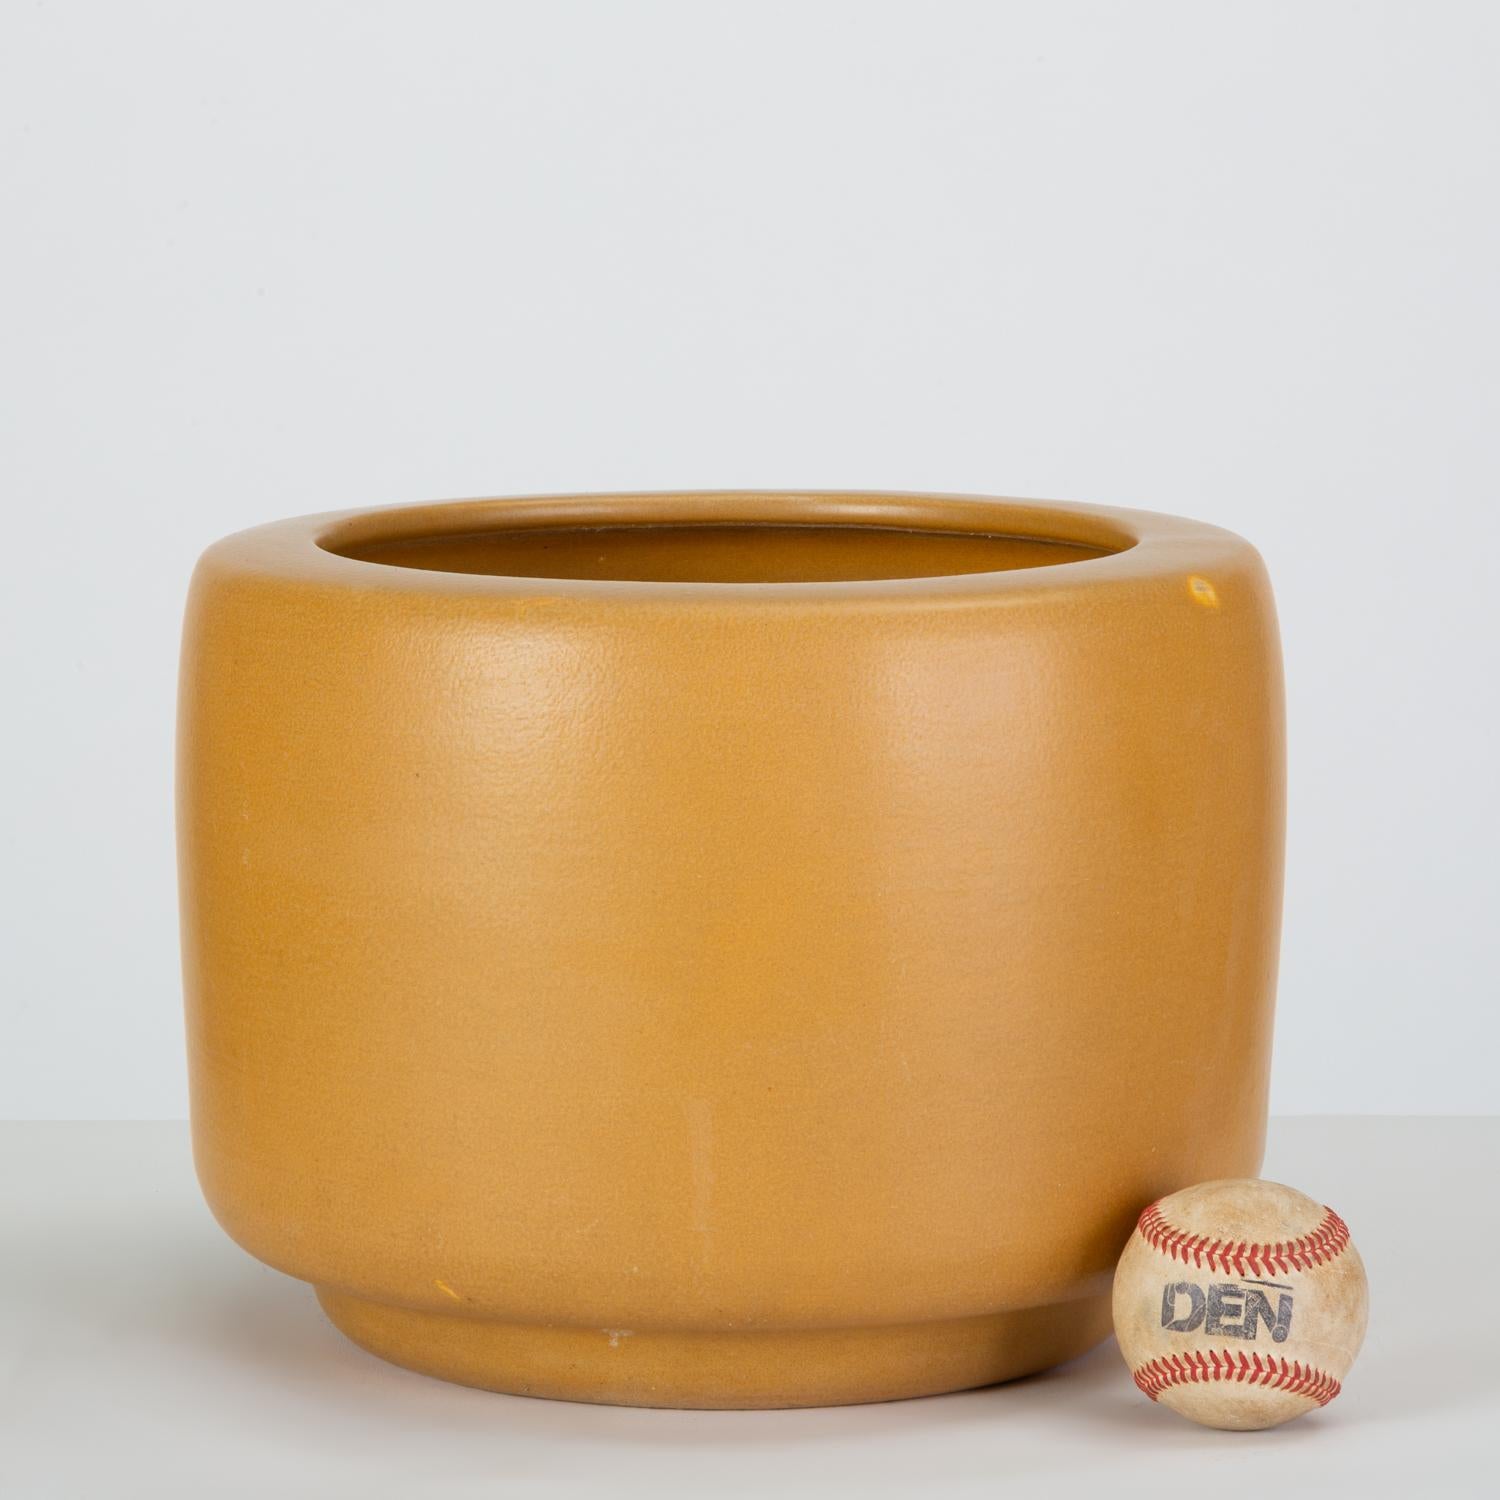 A mustard yellow bisque planter by John Follis for Architectural Pottery. This example has a drum shape with a rounded lip that curves in at the top of the piece. Planter retains partial stamp: “Architectural Pottery Made in USA.”

Condition: